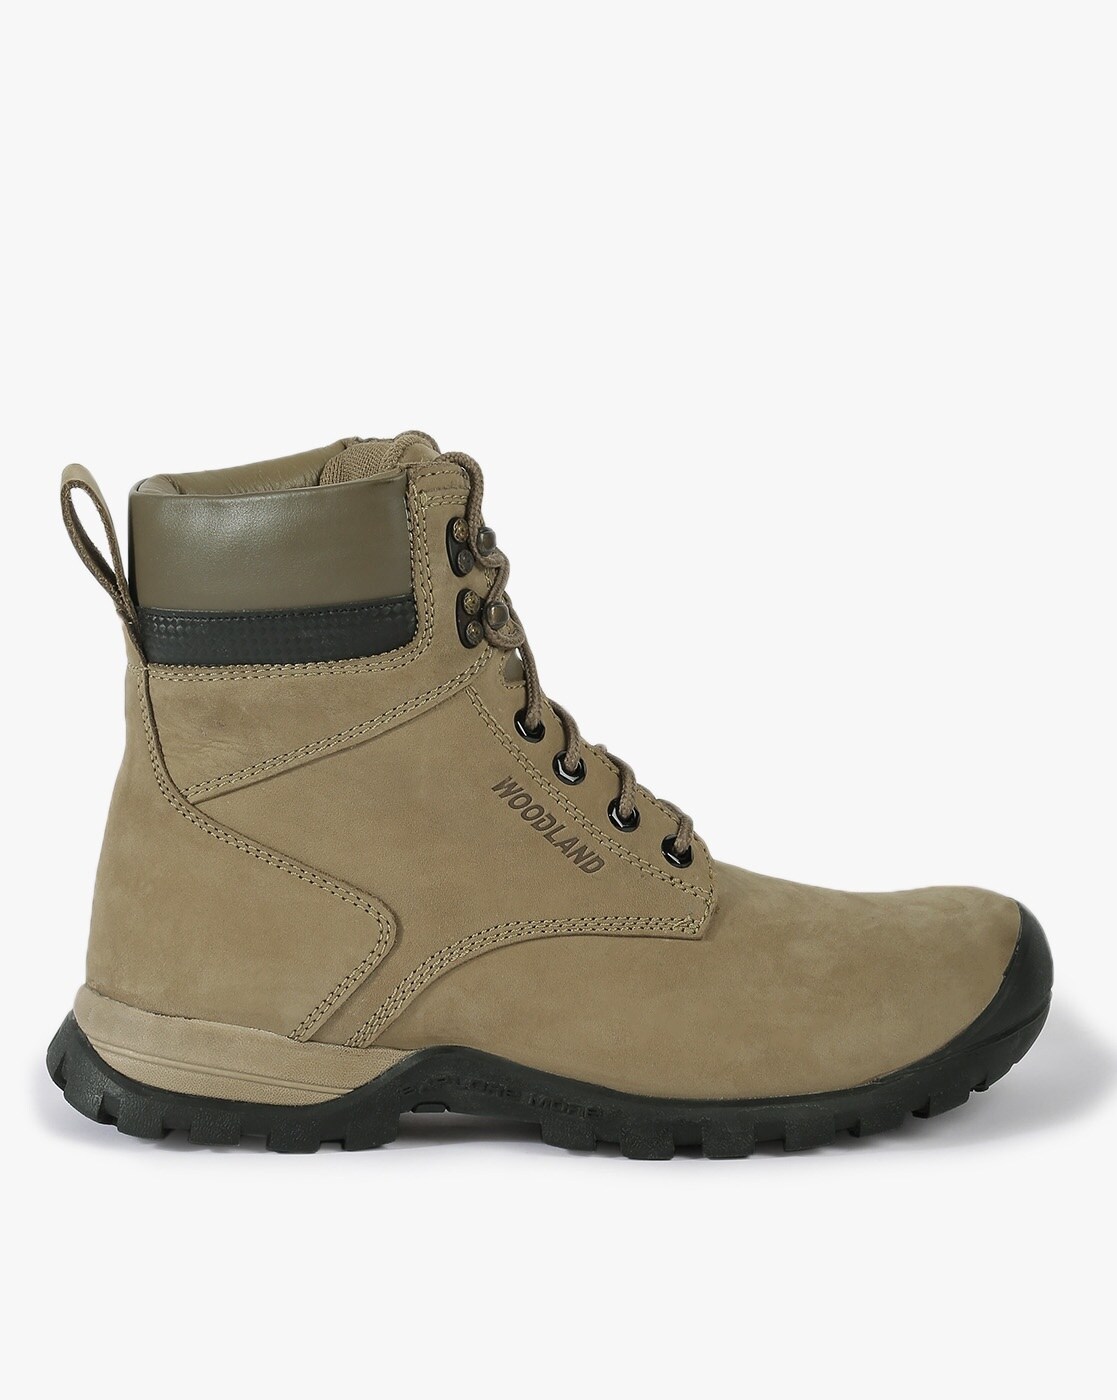 Buy Khaki Boots for Men by WOODLAND 